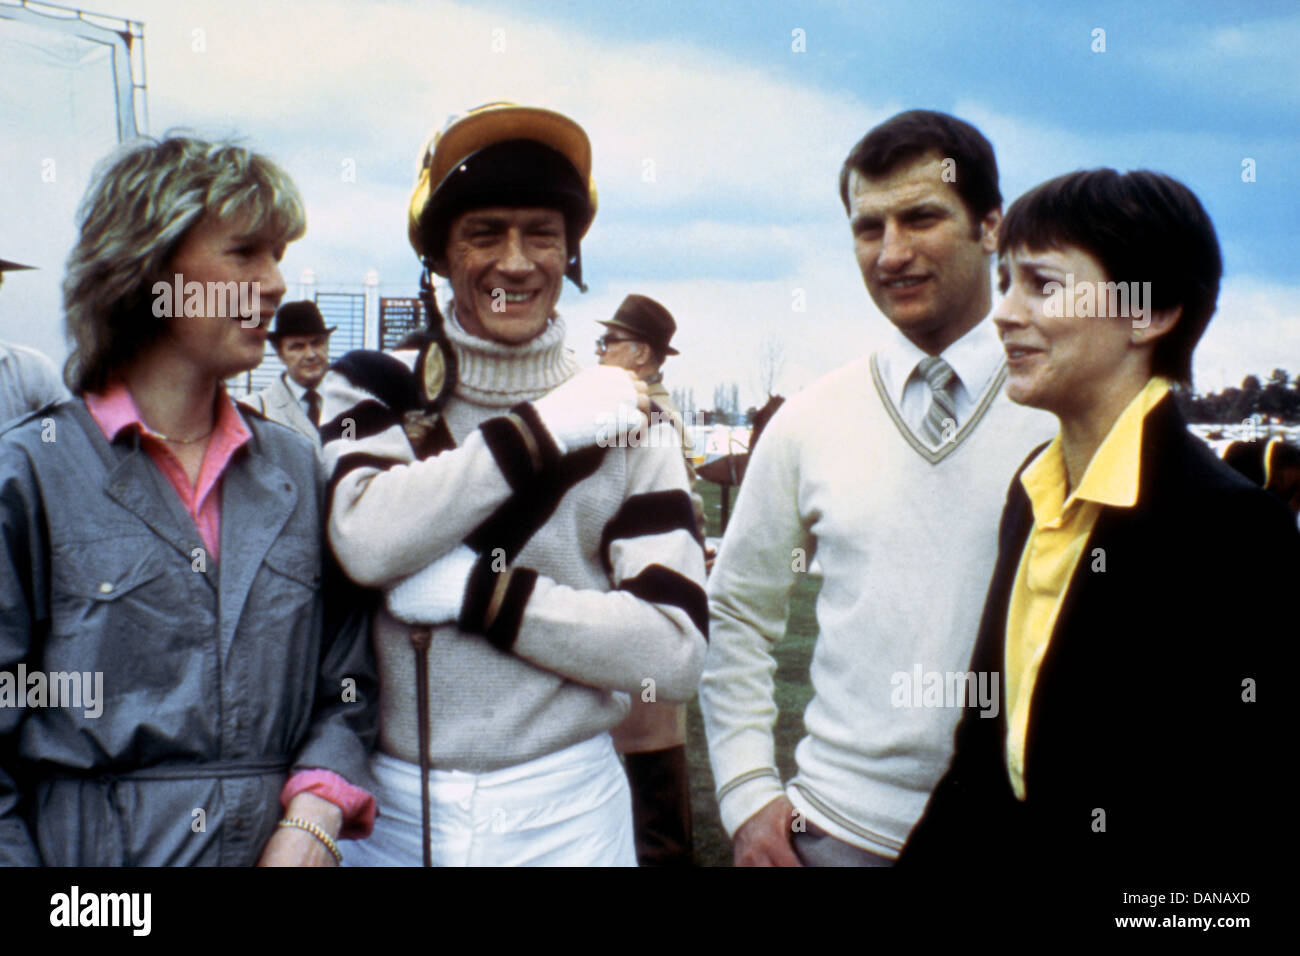 Champions 1984 John Hurt High Resolution Stock Photography and Images -  Alamy